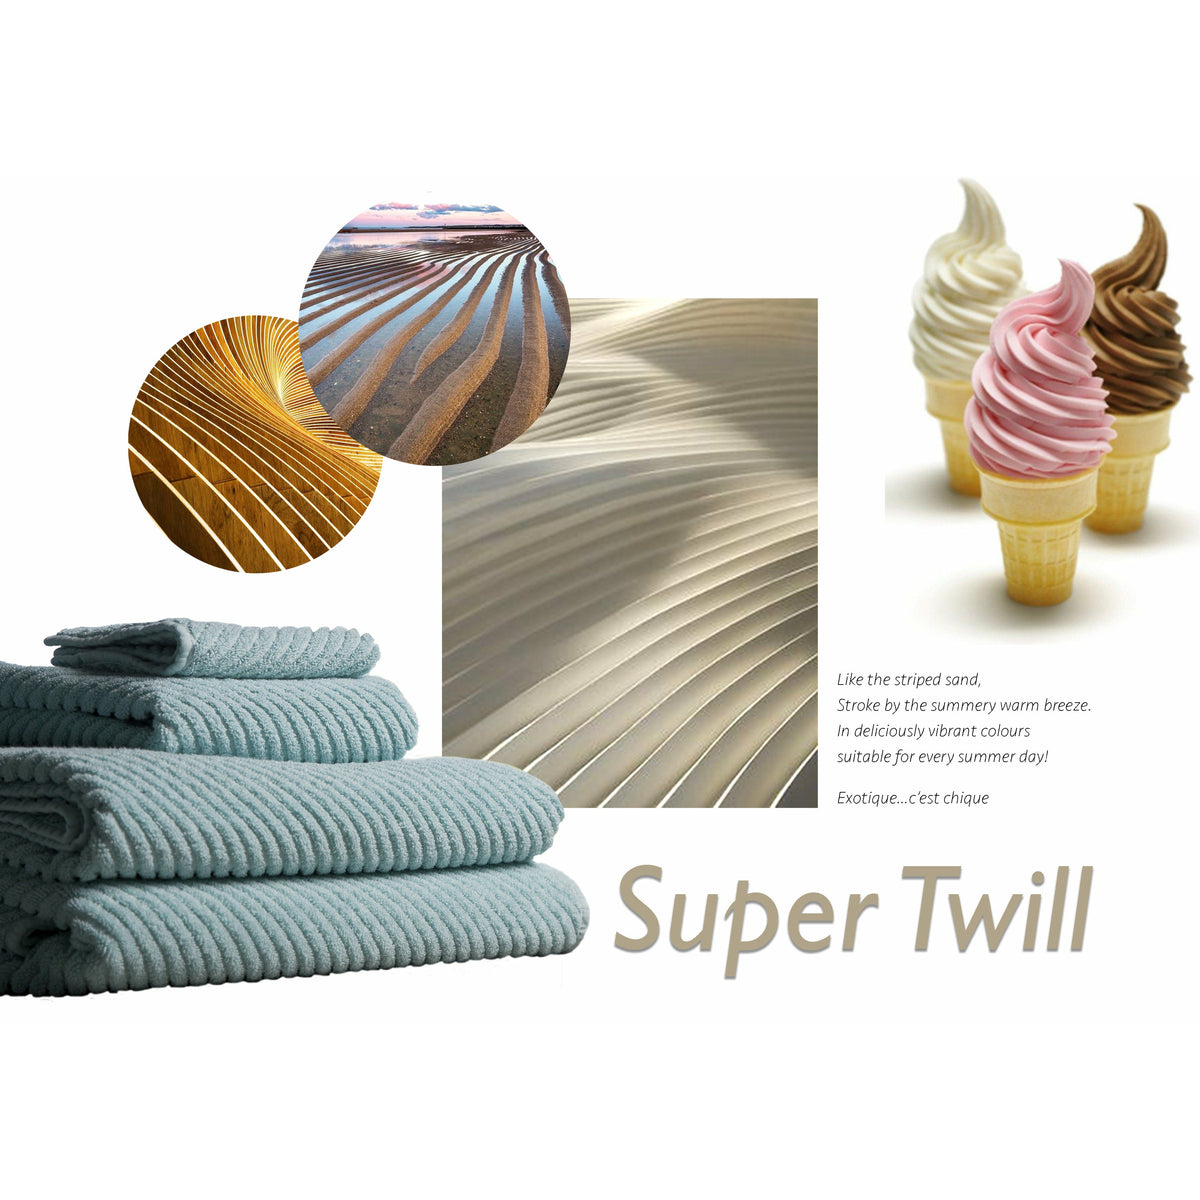 Abyss Super Twill Bath Towels Collage Fine Linens